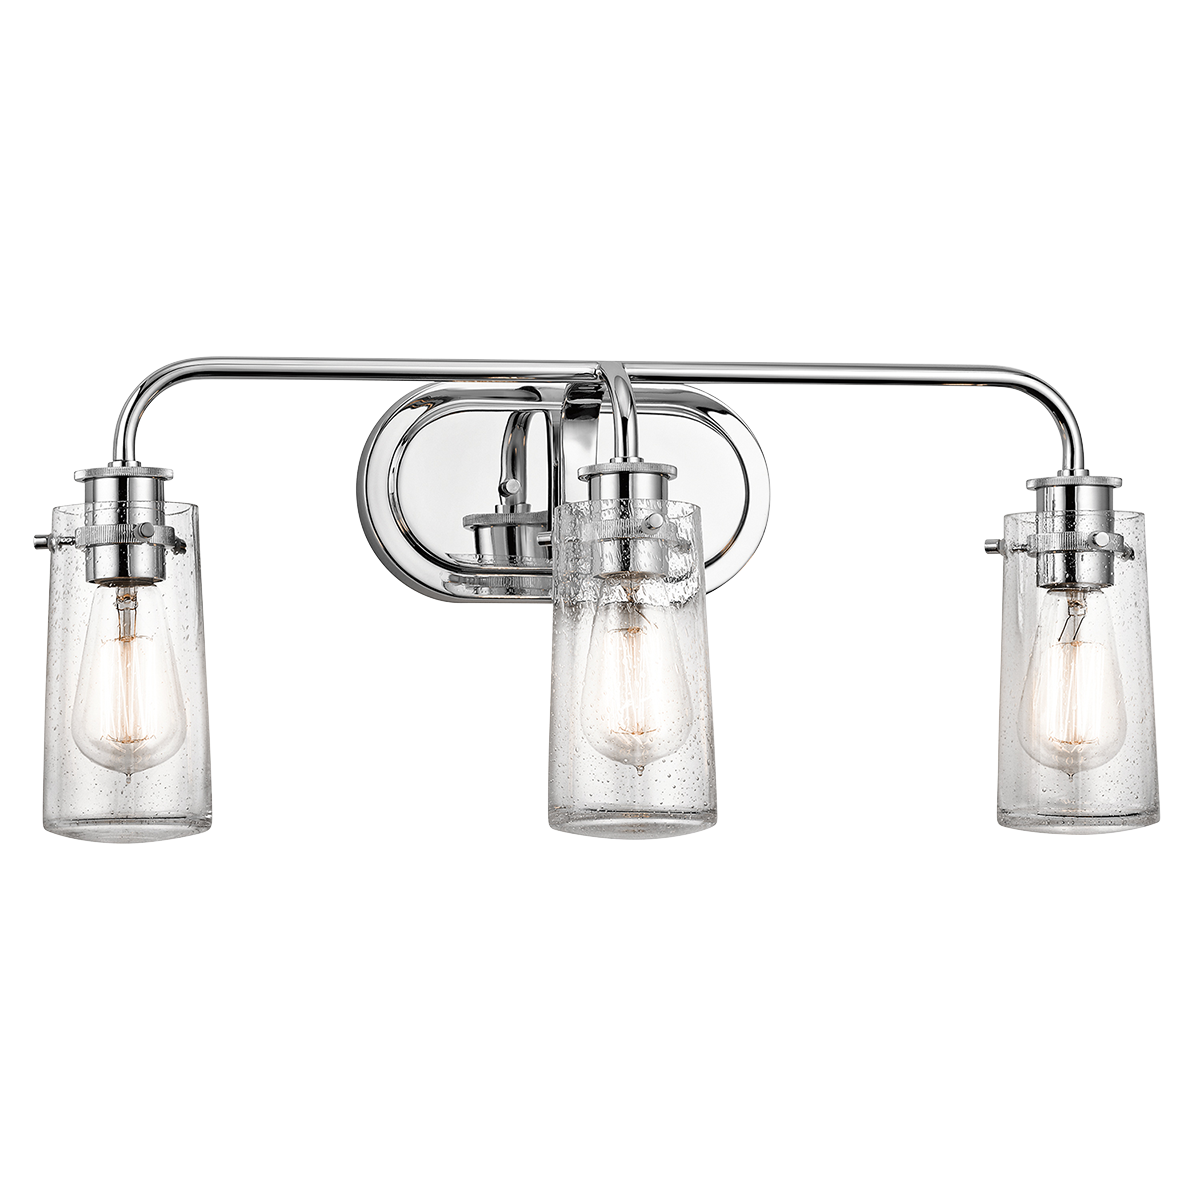 The Braelyn(TM) 24in. 3 light vanity light features an Chrome finish and clear seeded glass shades. The Braelyn(TM) offers a vintage industrial design that works well with rustic, country and lodge décor.